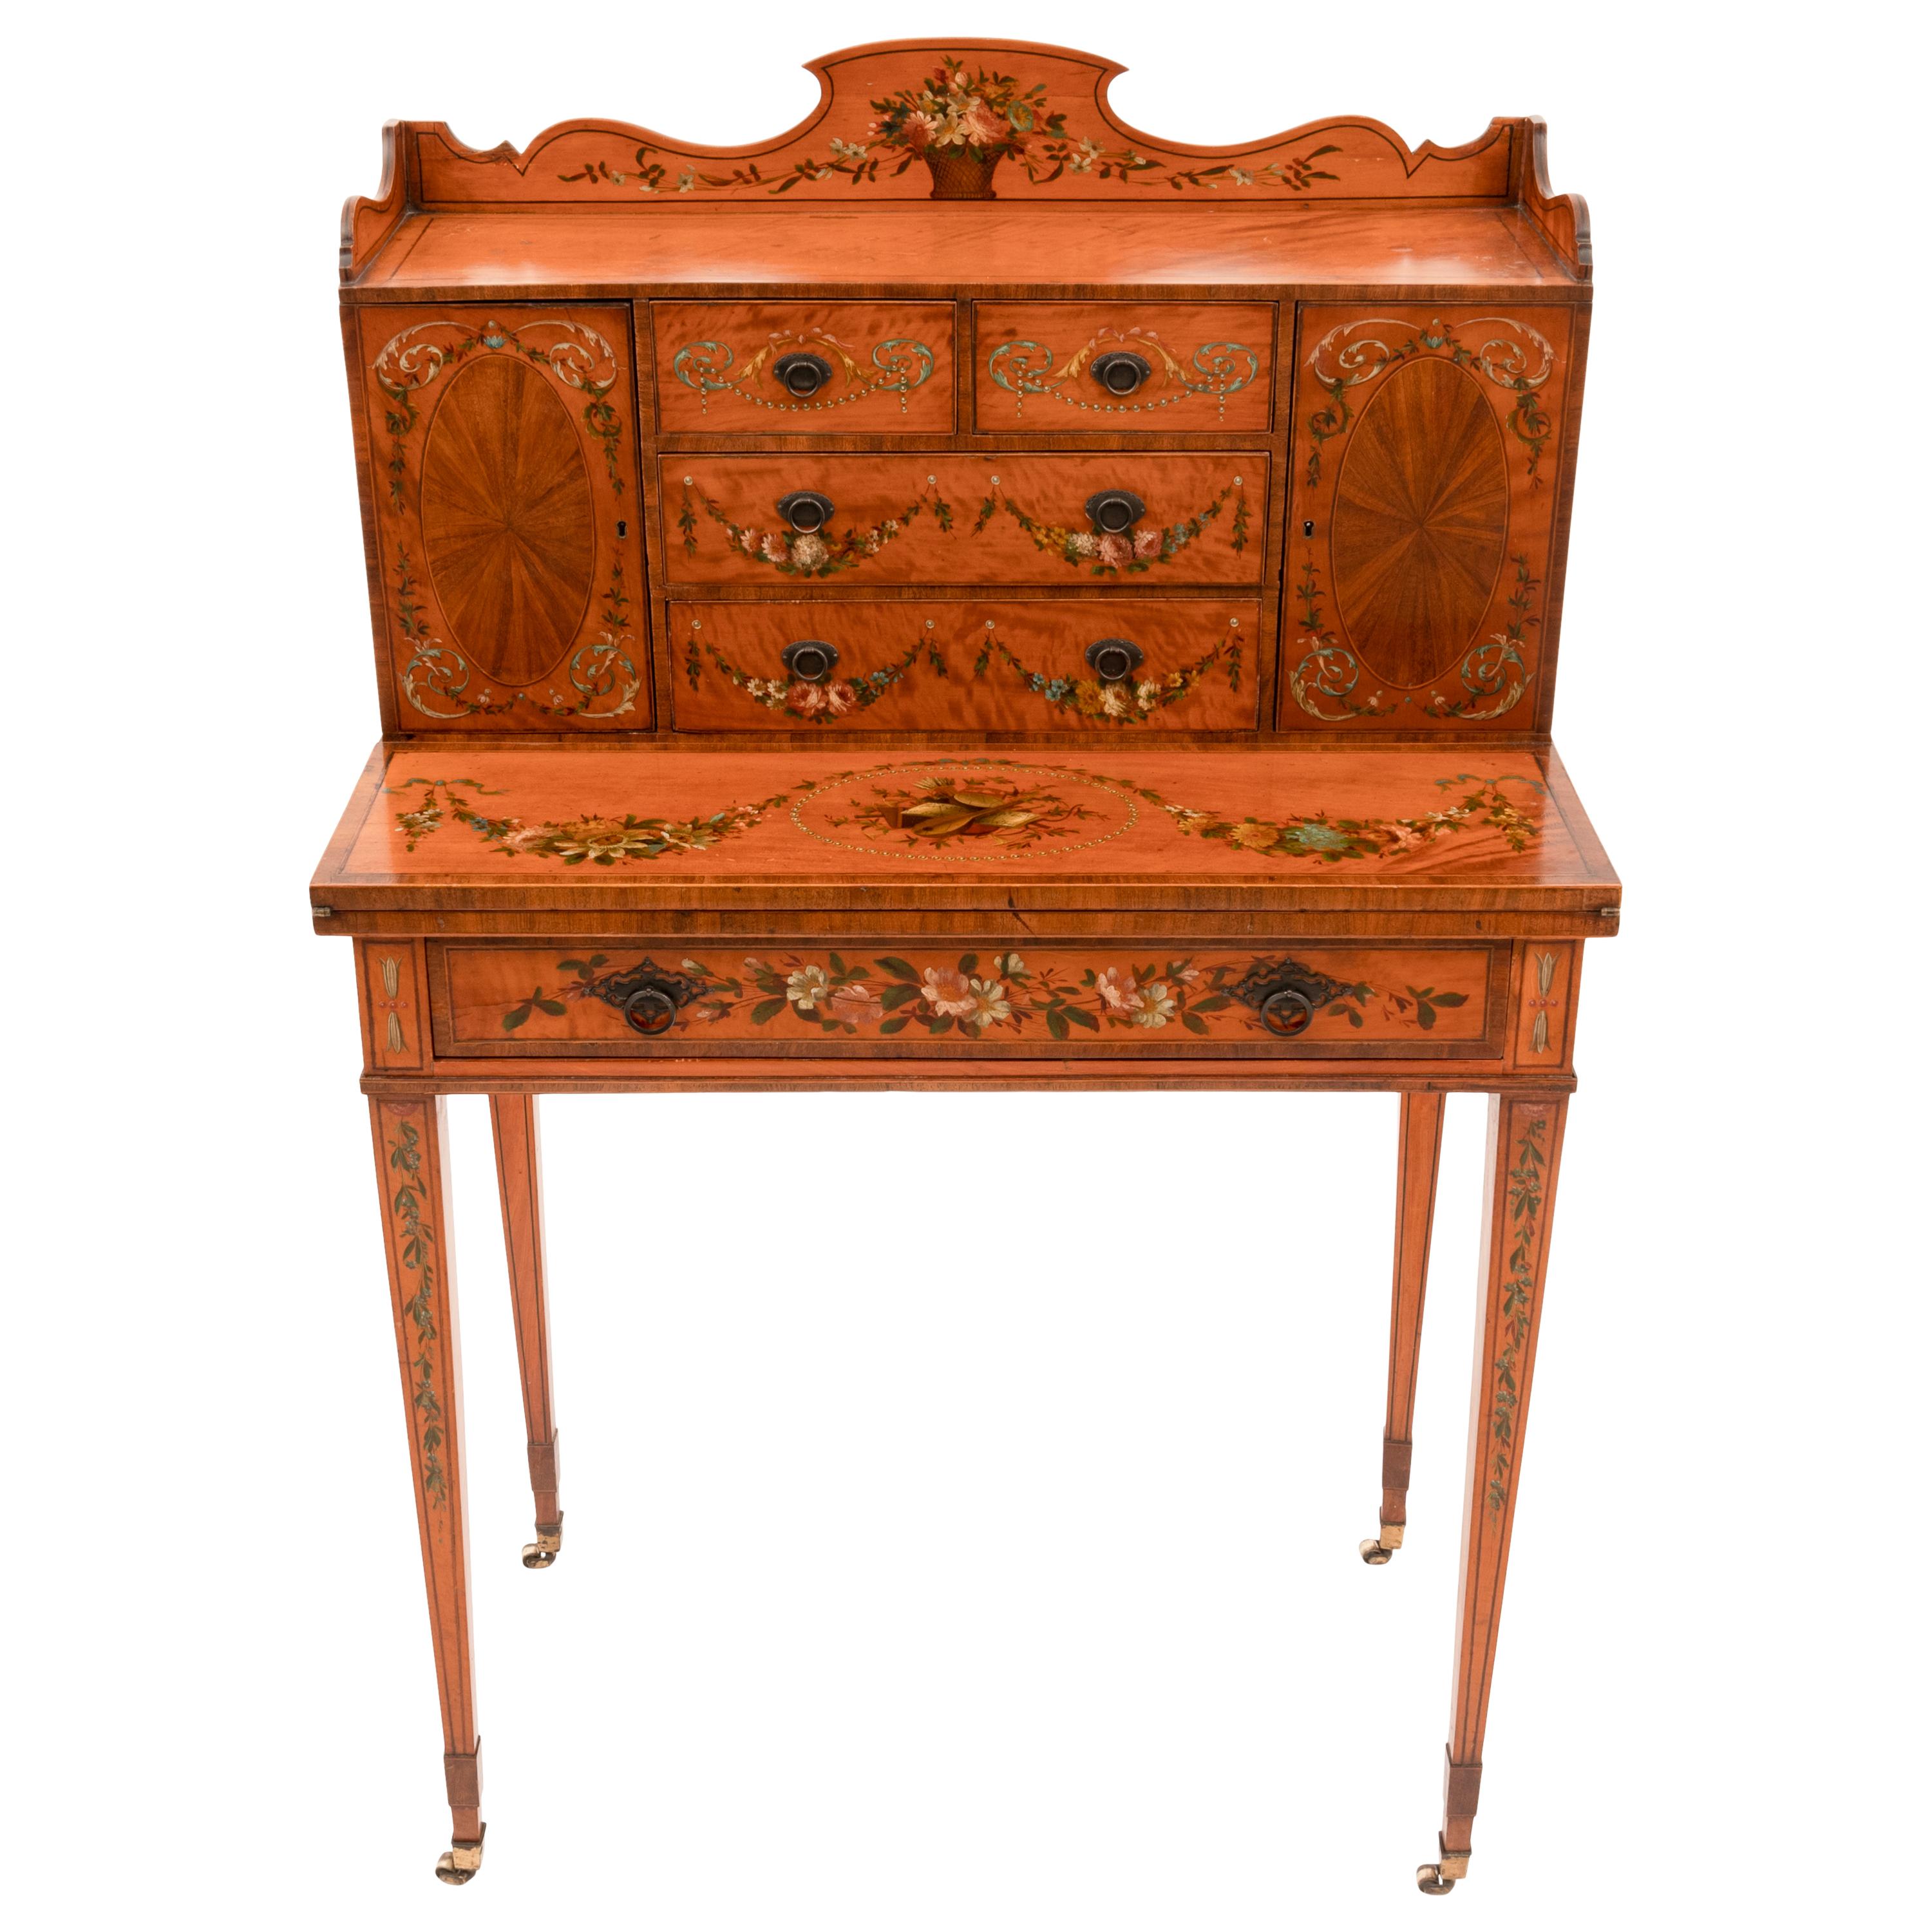 Antique George III Edwardian Adam Style Satinwood Painted Desk Bonheur Du Jour In Good Condition For Sale In Portland, OR